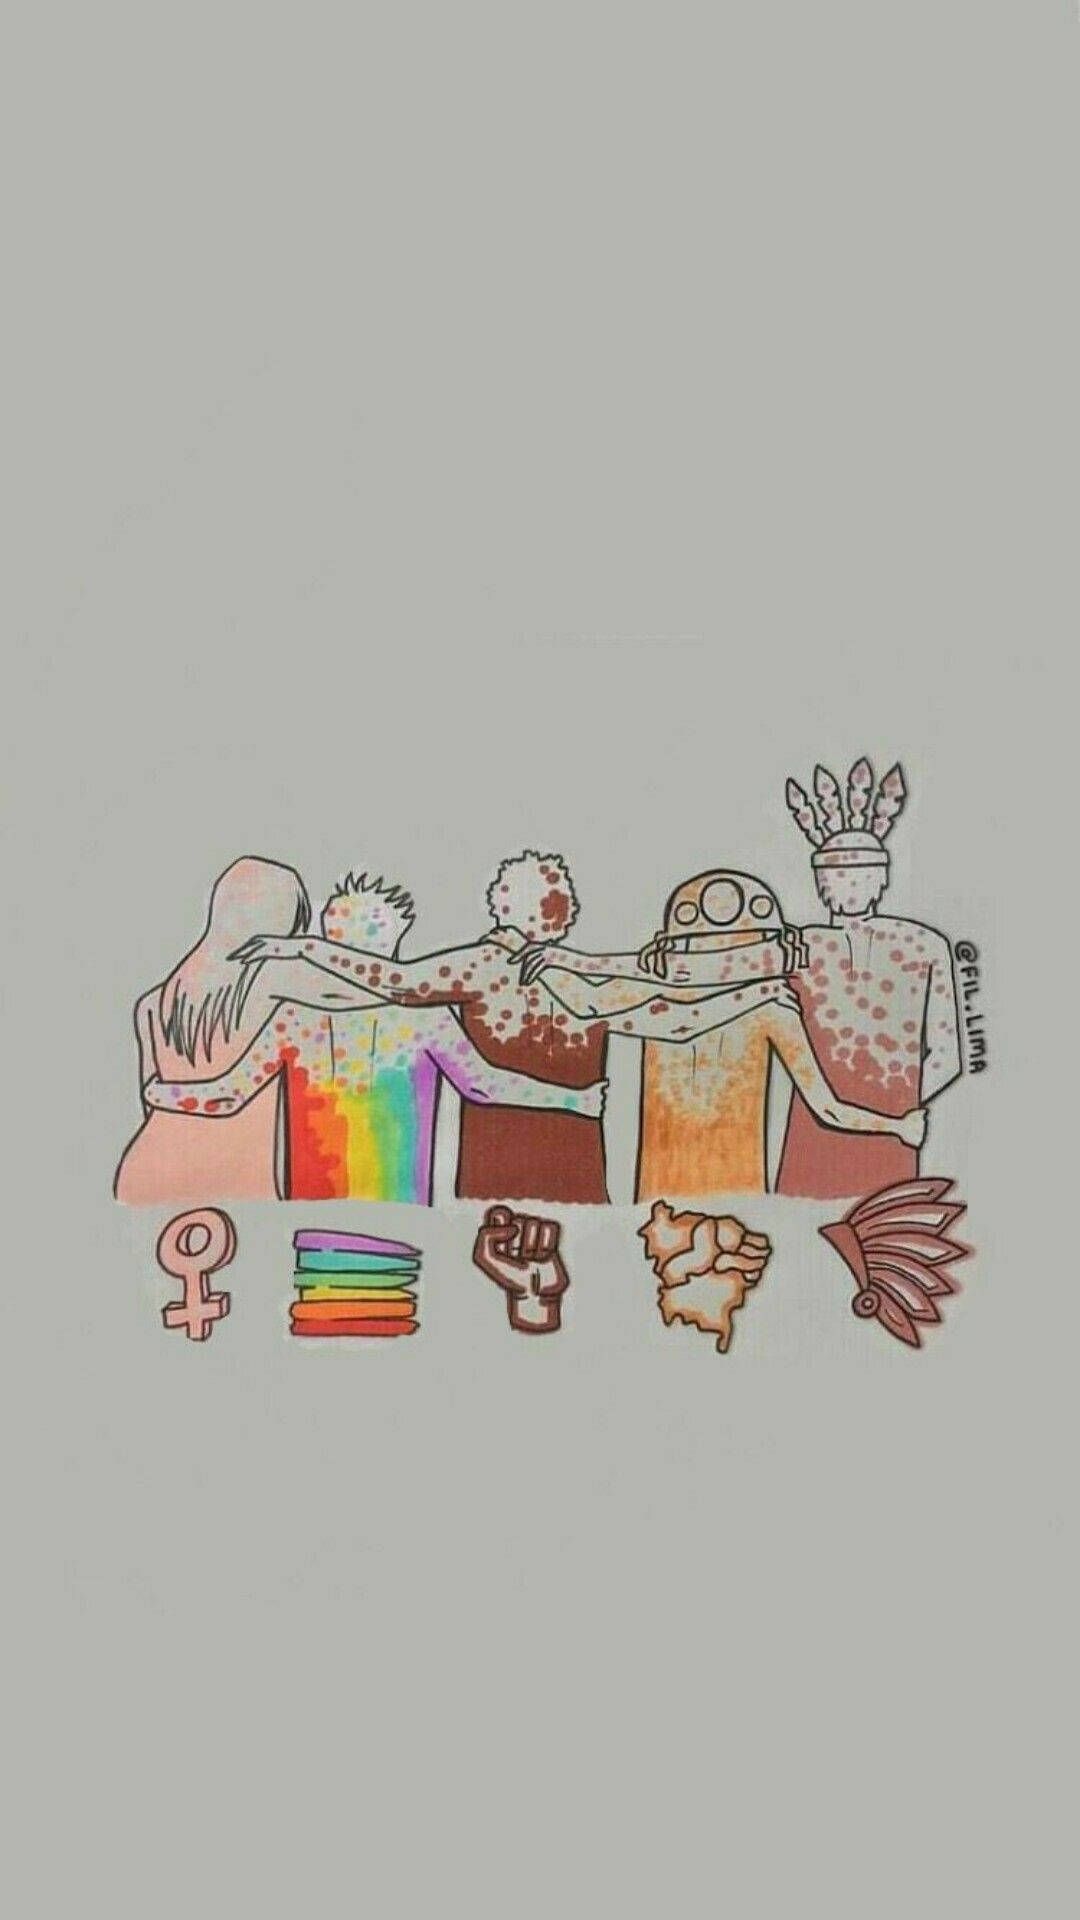 This is a drawing of a group of people holding hands. - LGBT, gay